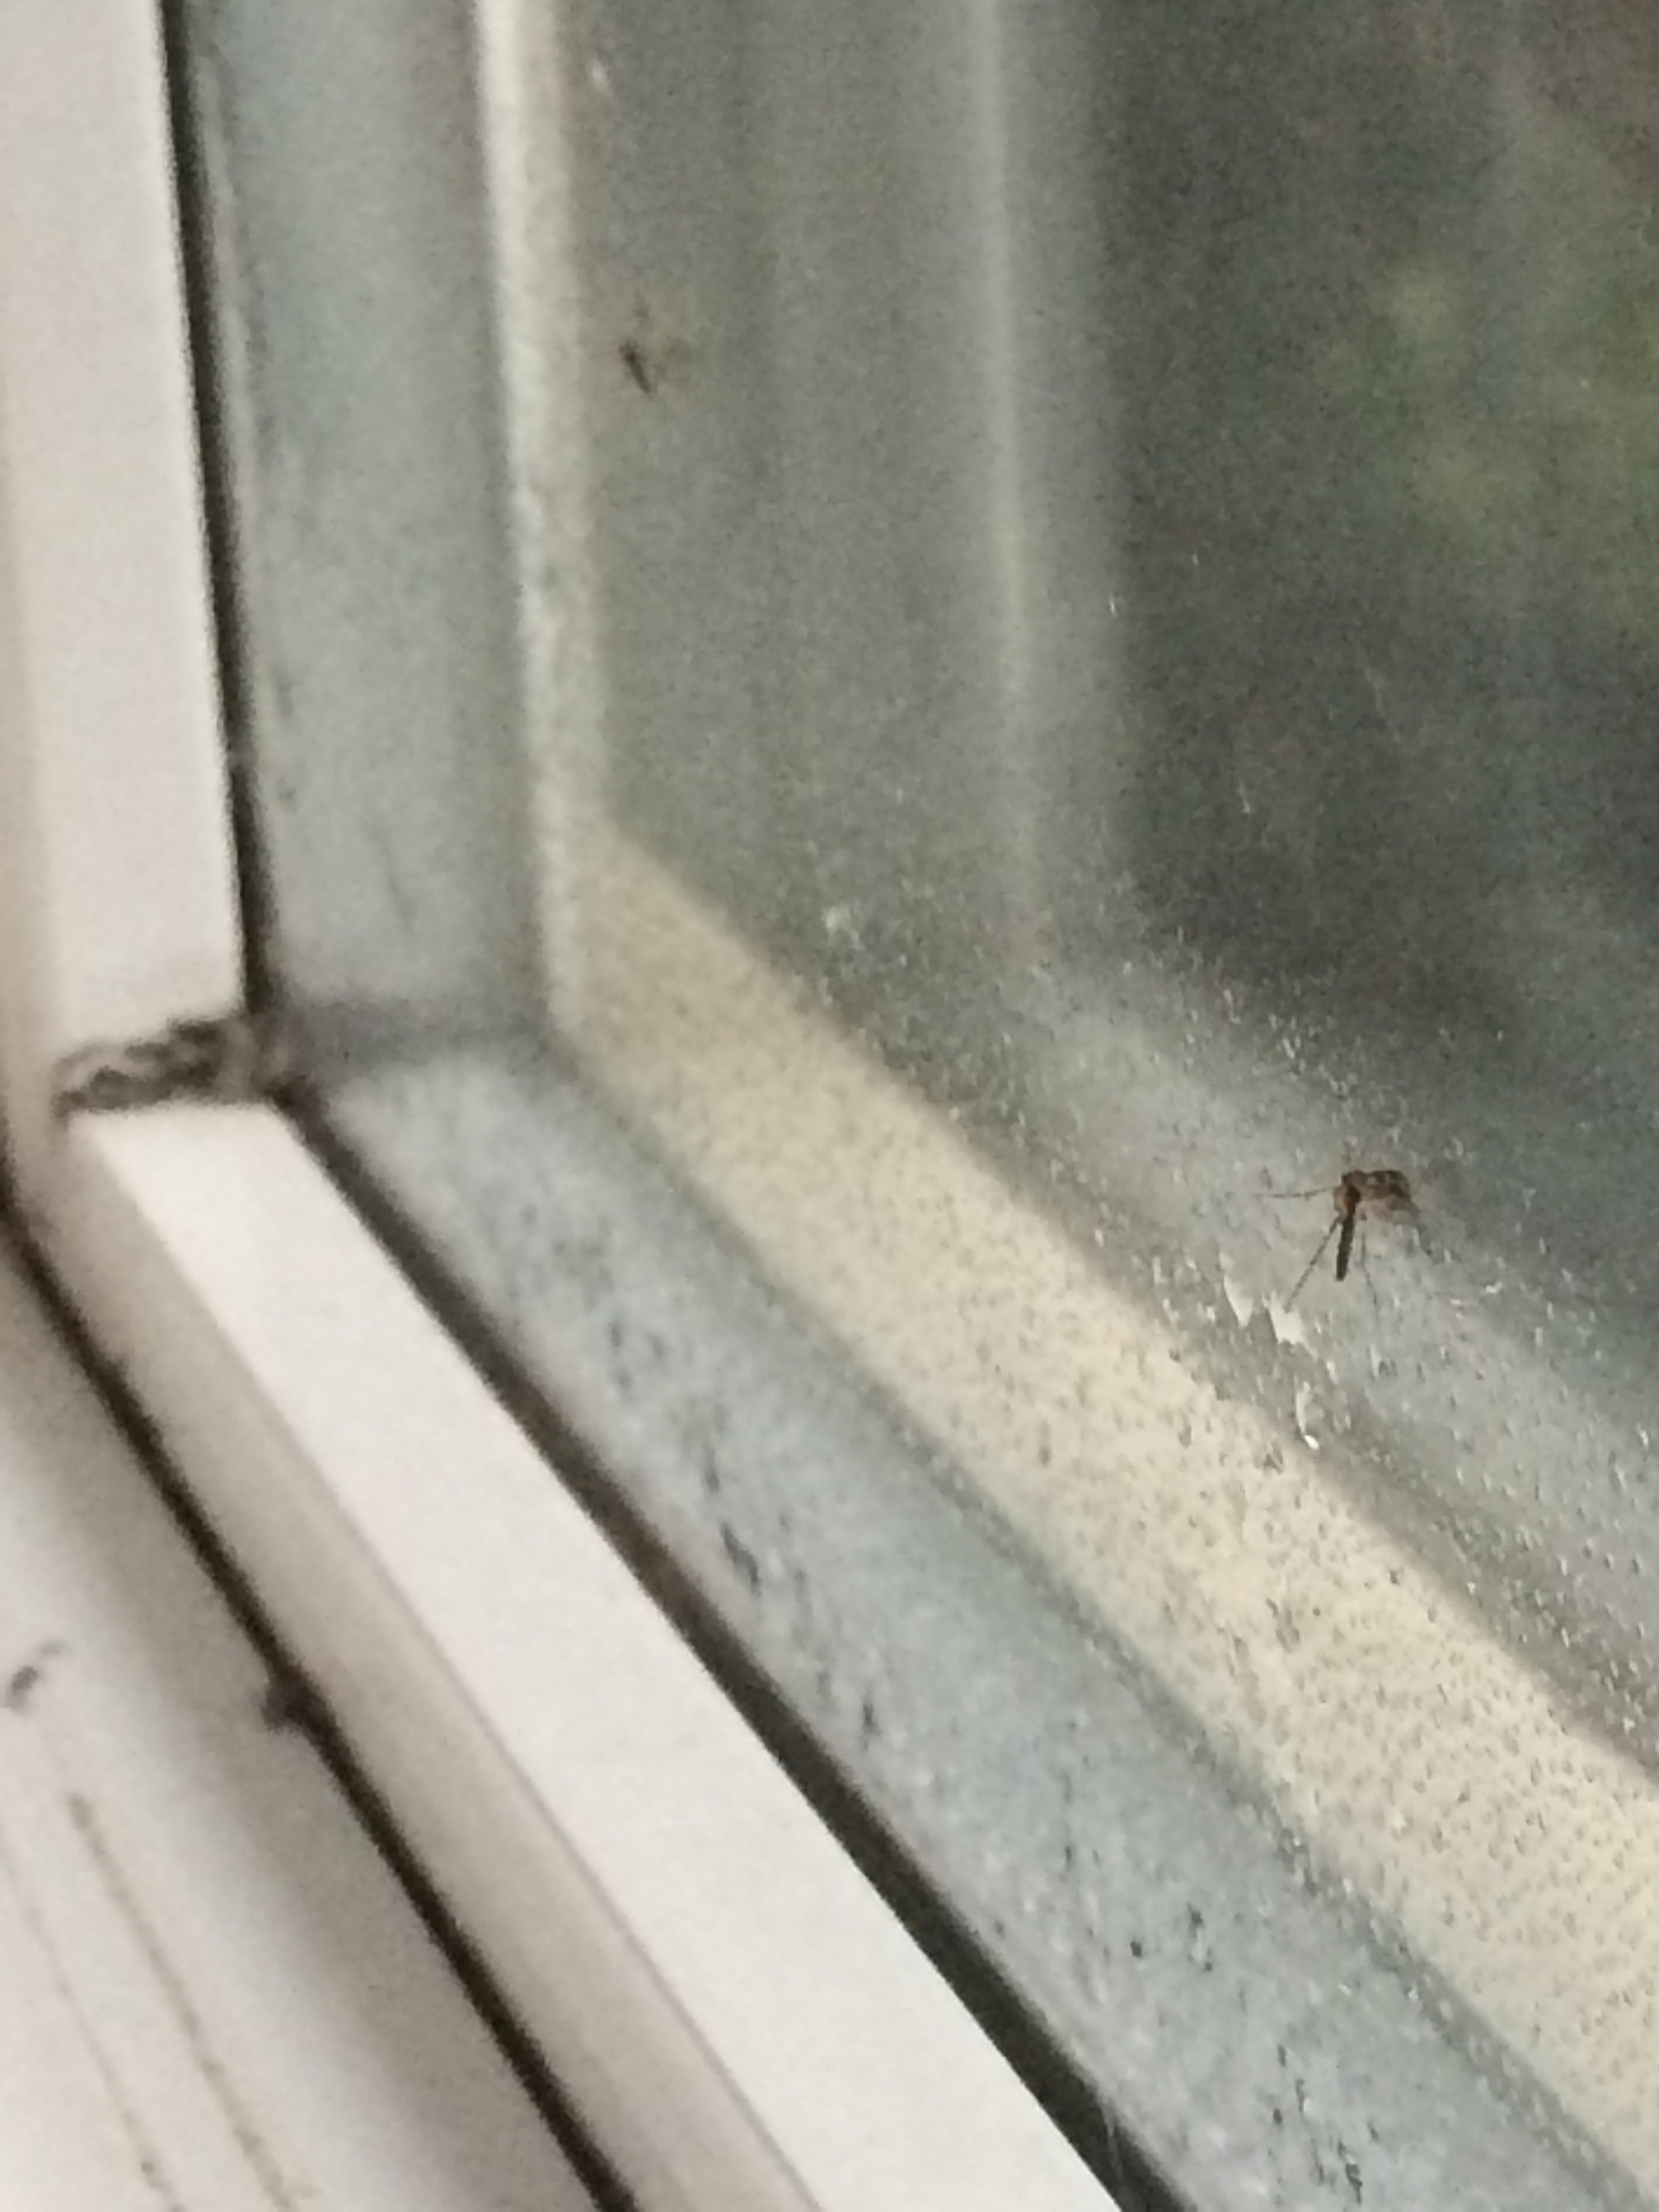 Small Flying Bugs In Window In Winter 297205 Ask Extension